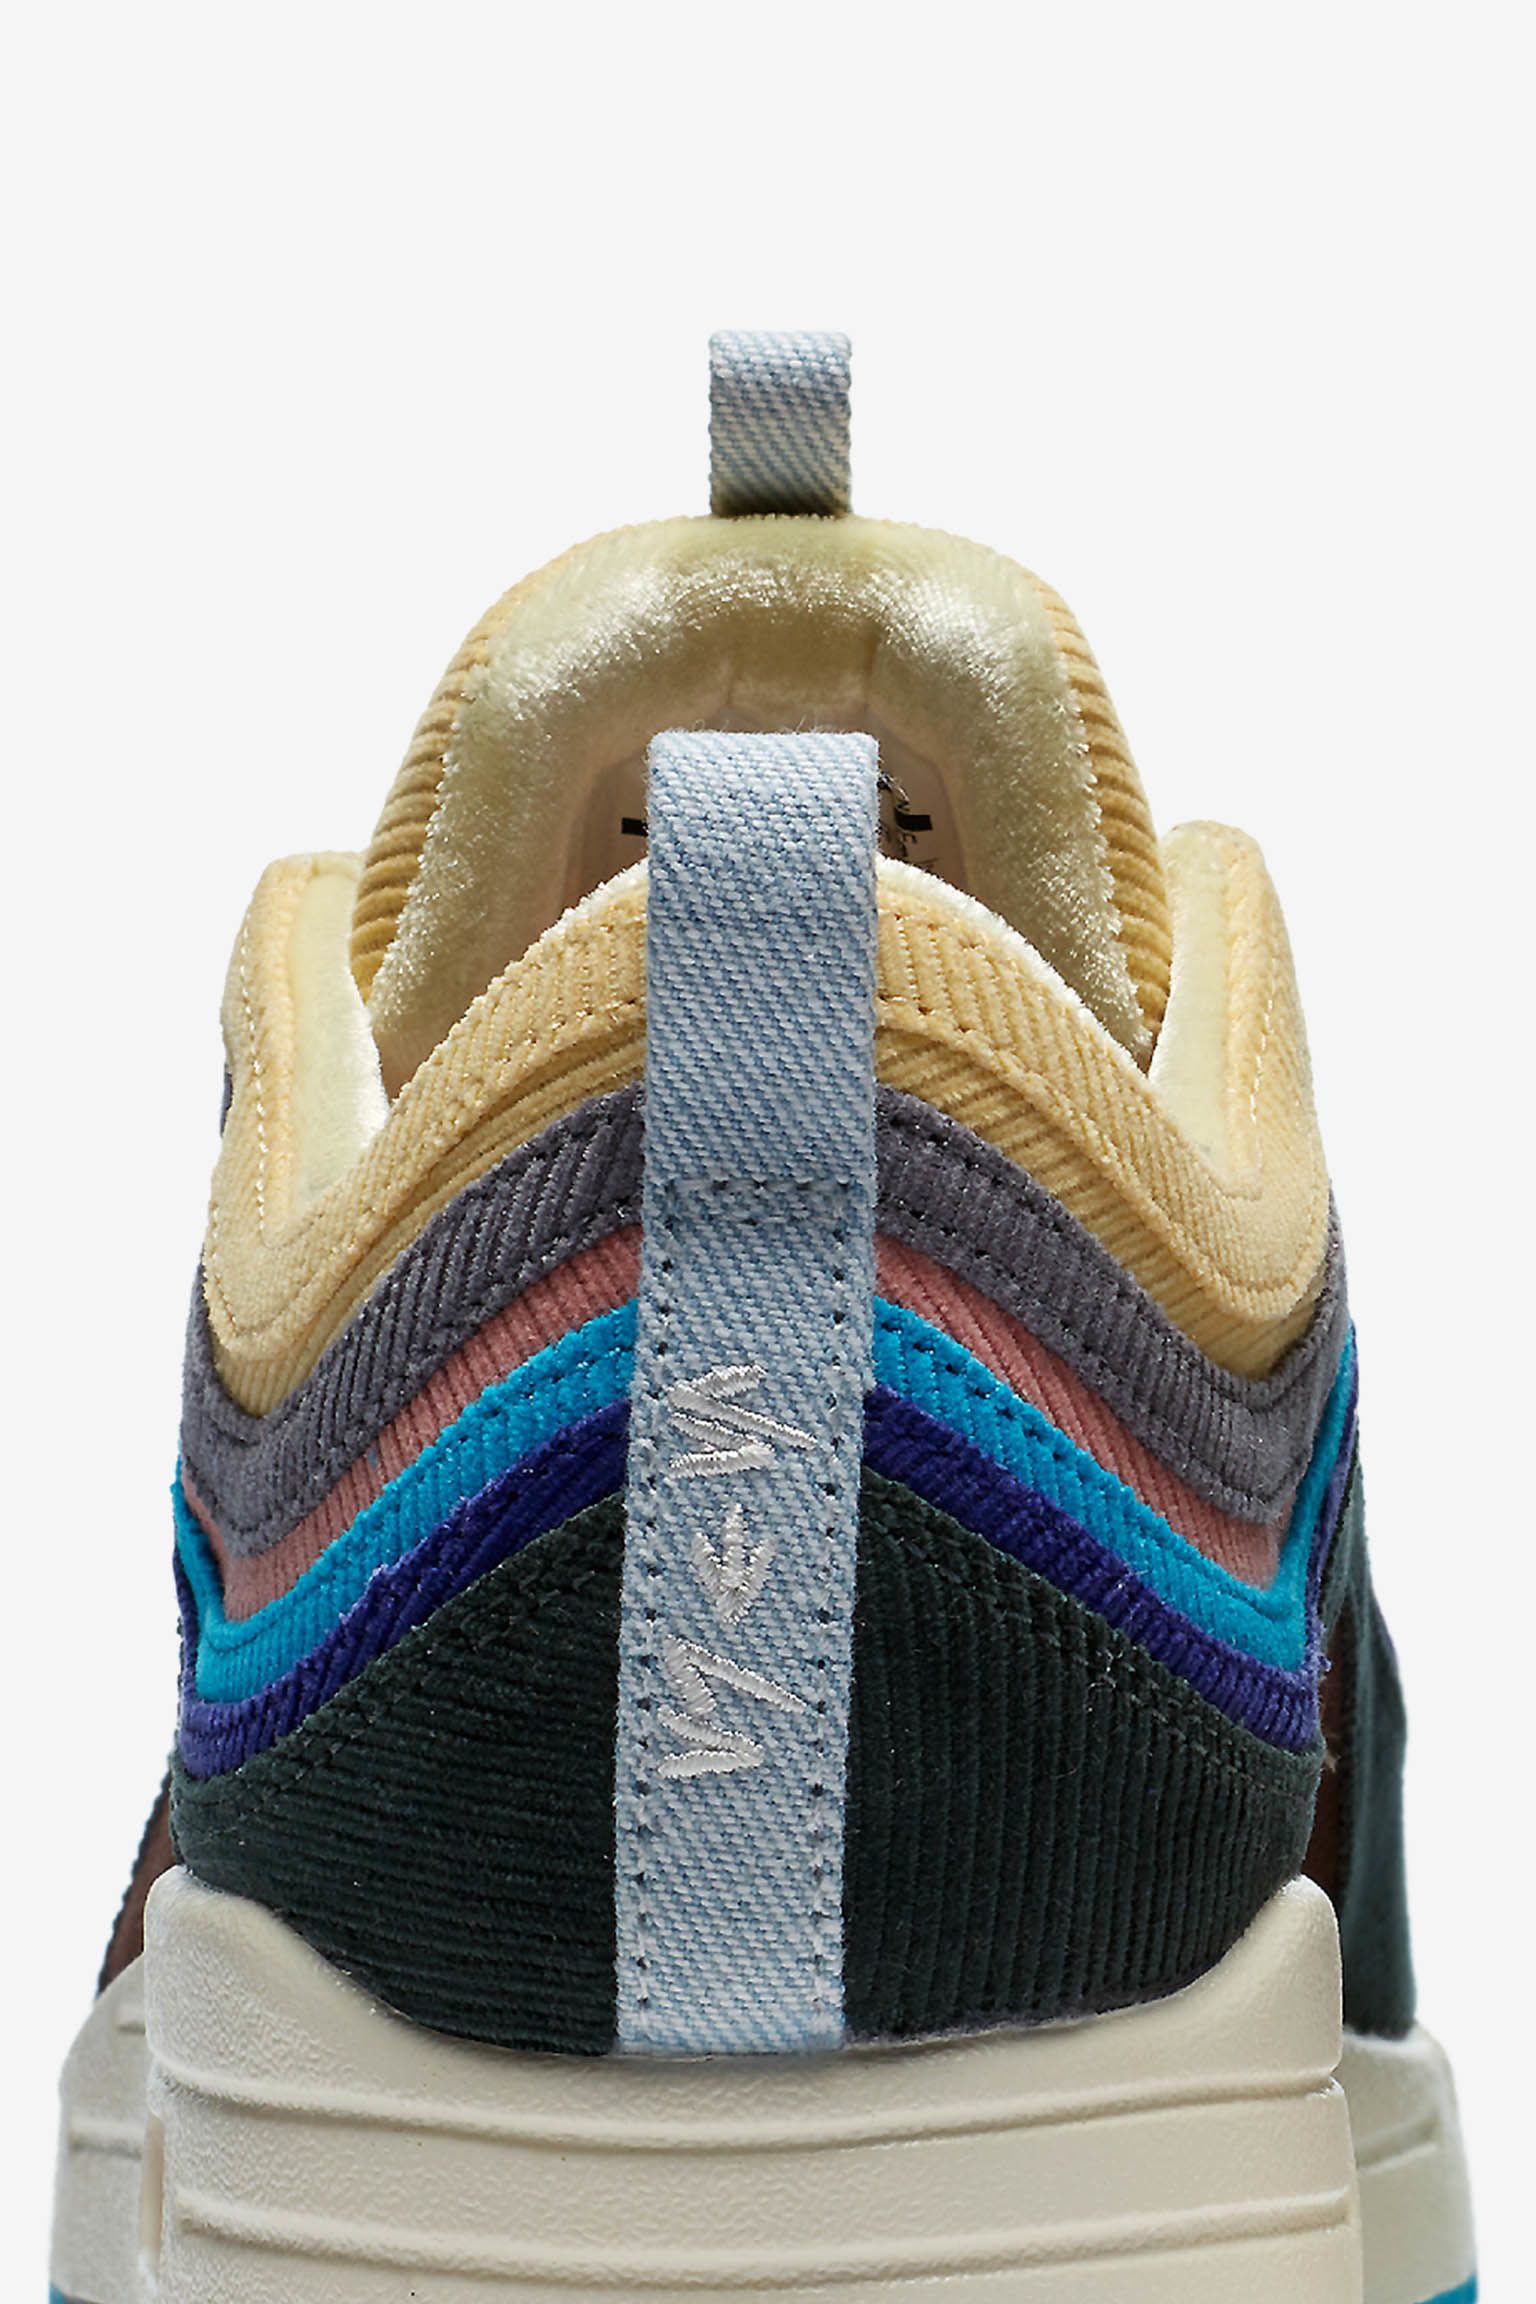 Nike Air Max 1/97 'Sean Wotherspoon' Release Date.